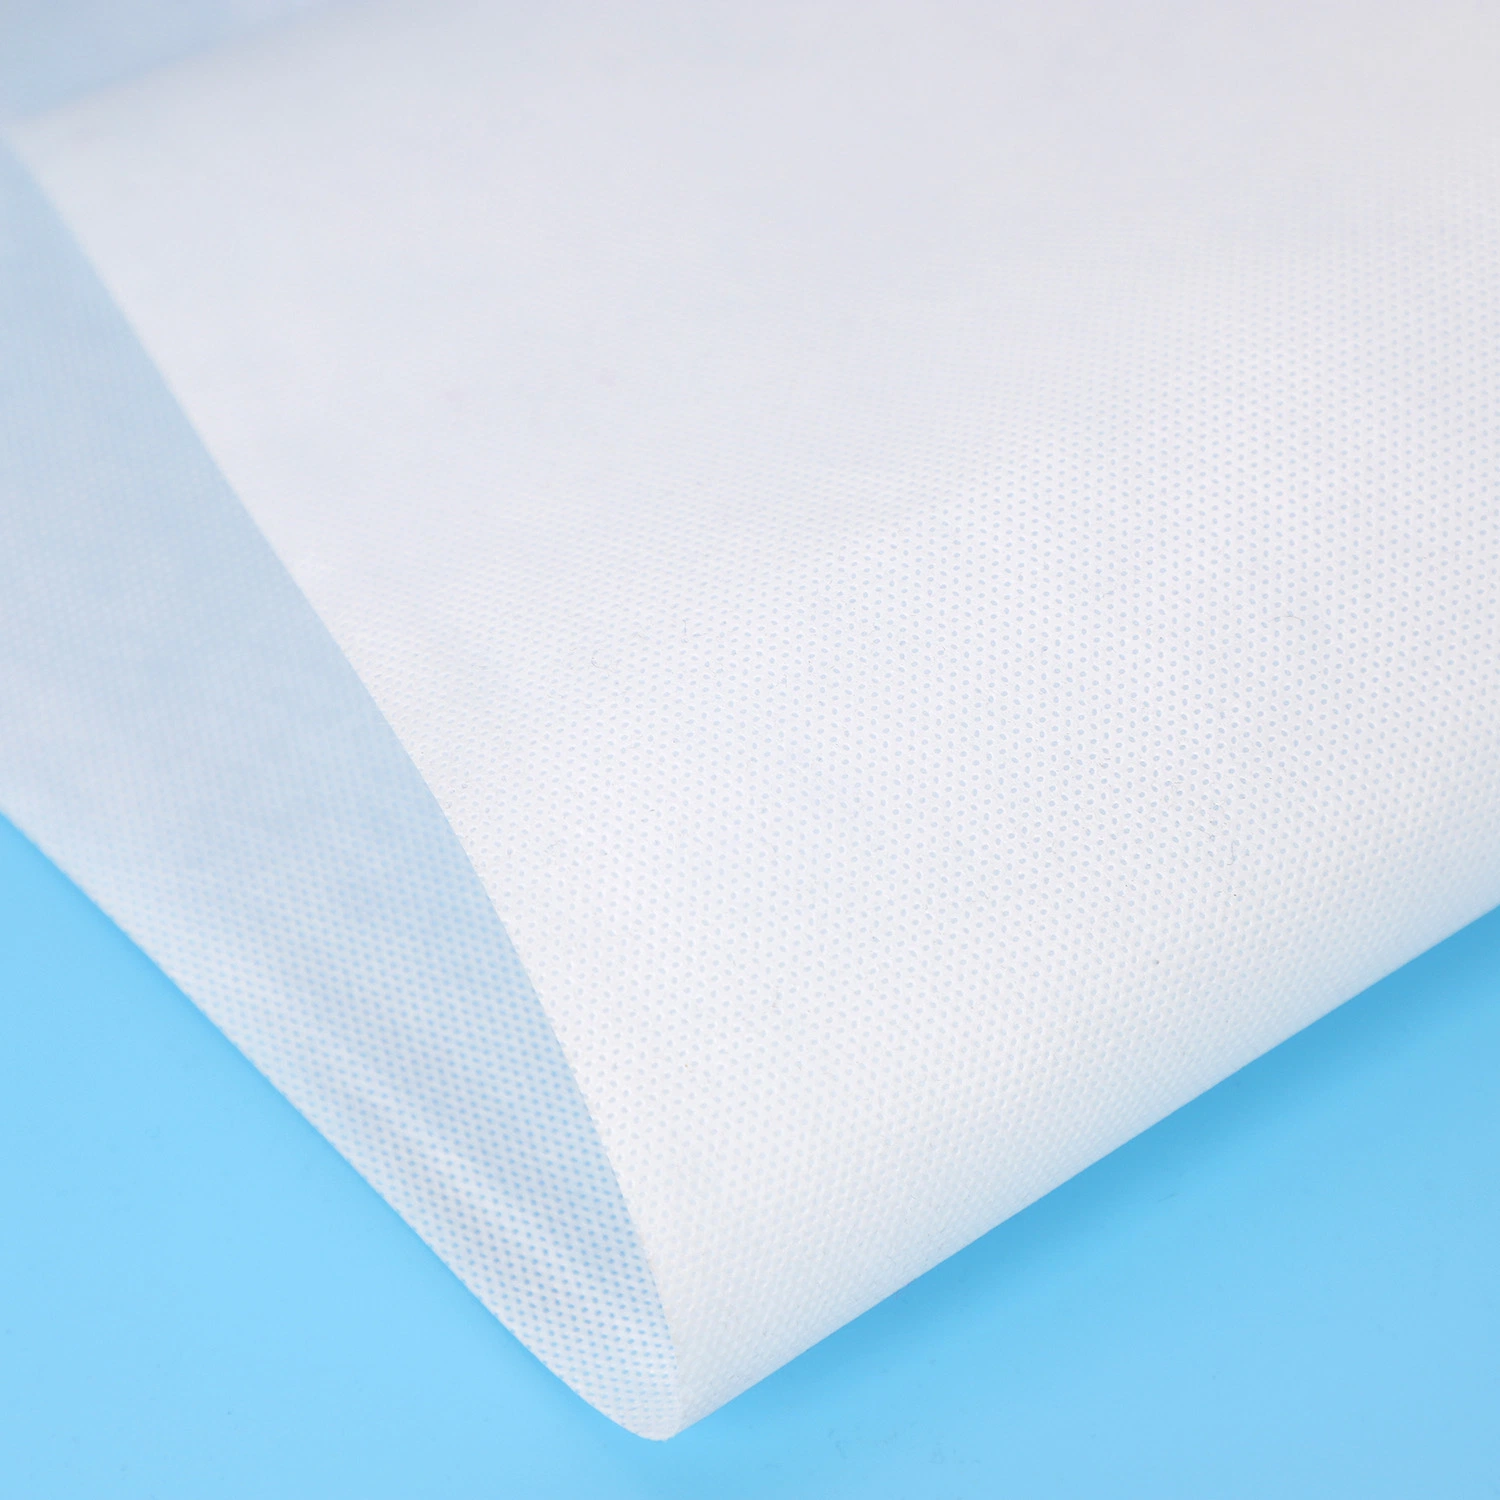 China Manufacturer of PP Spunbond Non Woven Fabric Textile for Mattress